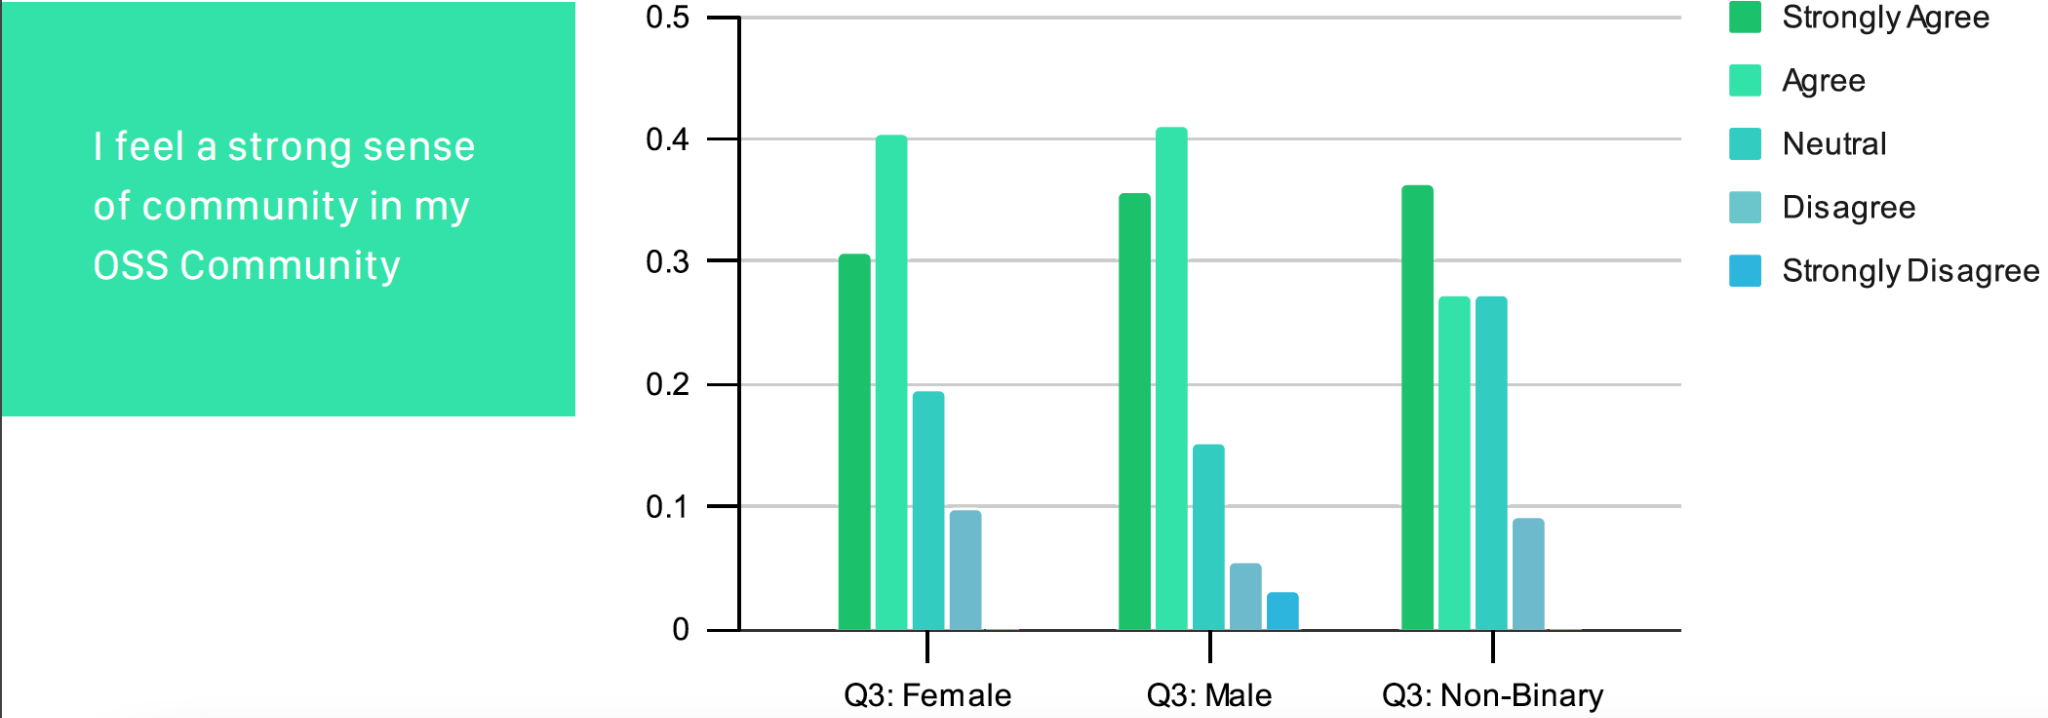 Bar chart showing result of "I feel a strong sense of community in my OSS Community" between: Q3 Female, Male and Non-Binary where Q3 Female and Q3 Male are dominant on "Agree" and Non-Binary are dominant on "Strongly Agree" 